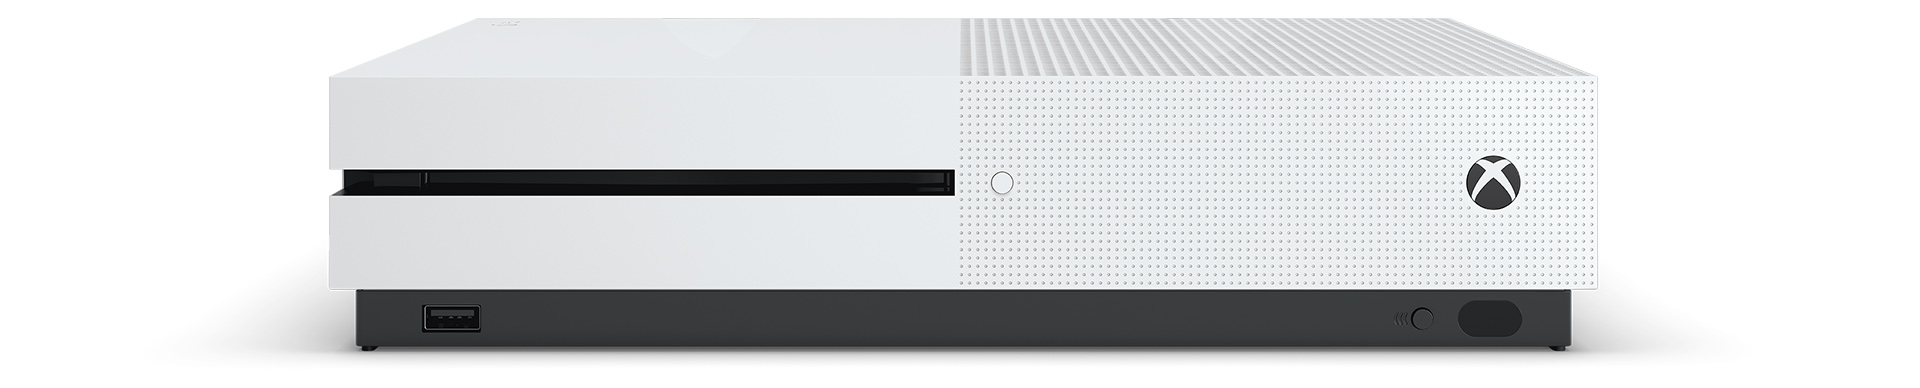 [E3 2016] Xbox One S is the new slim Xbox One, coming August